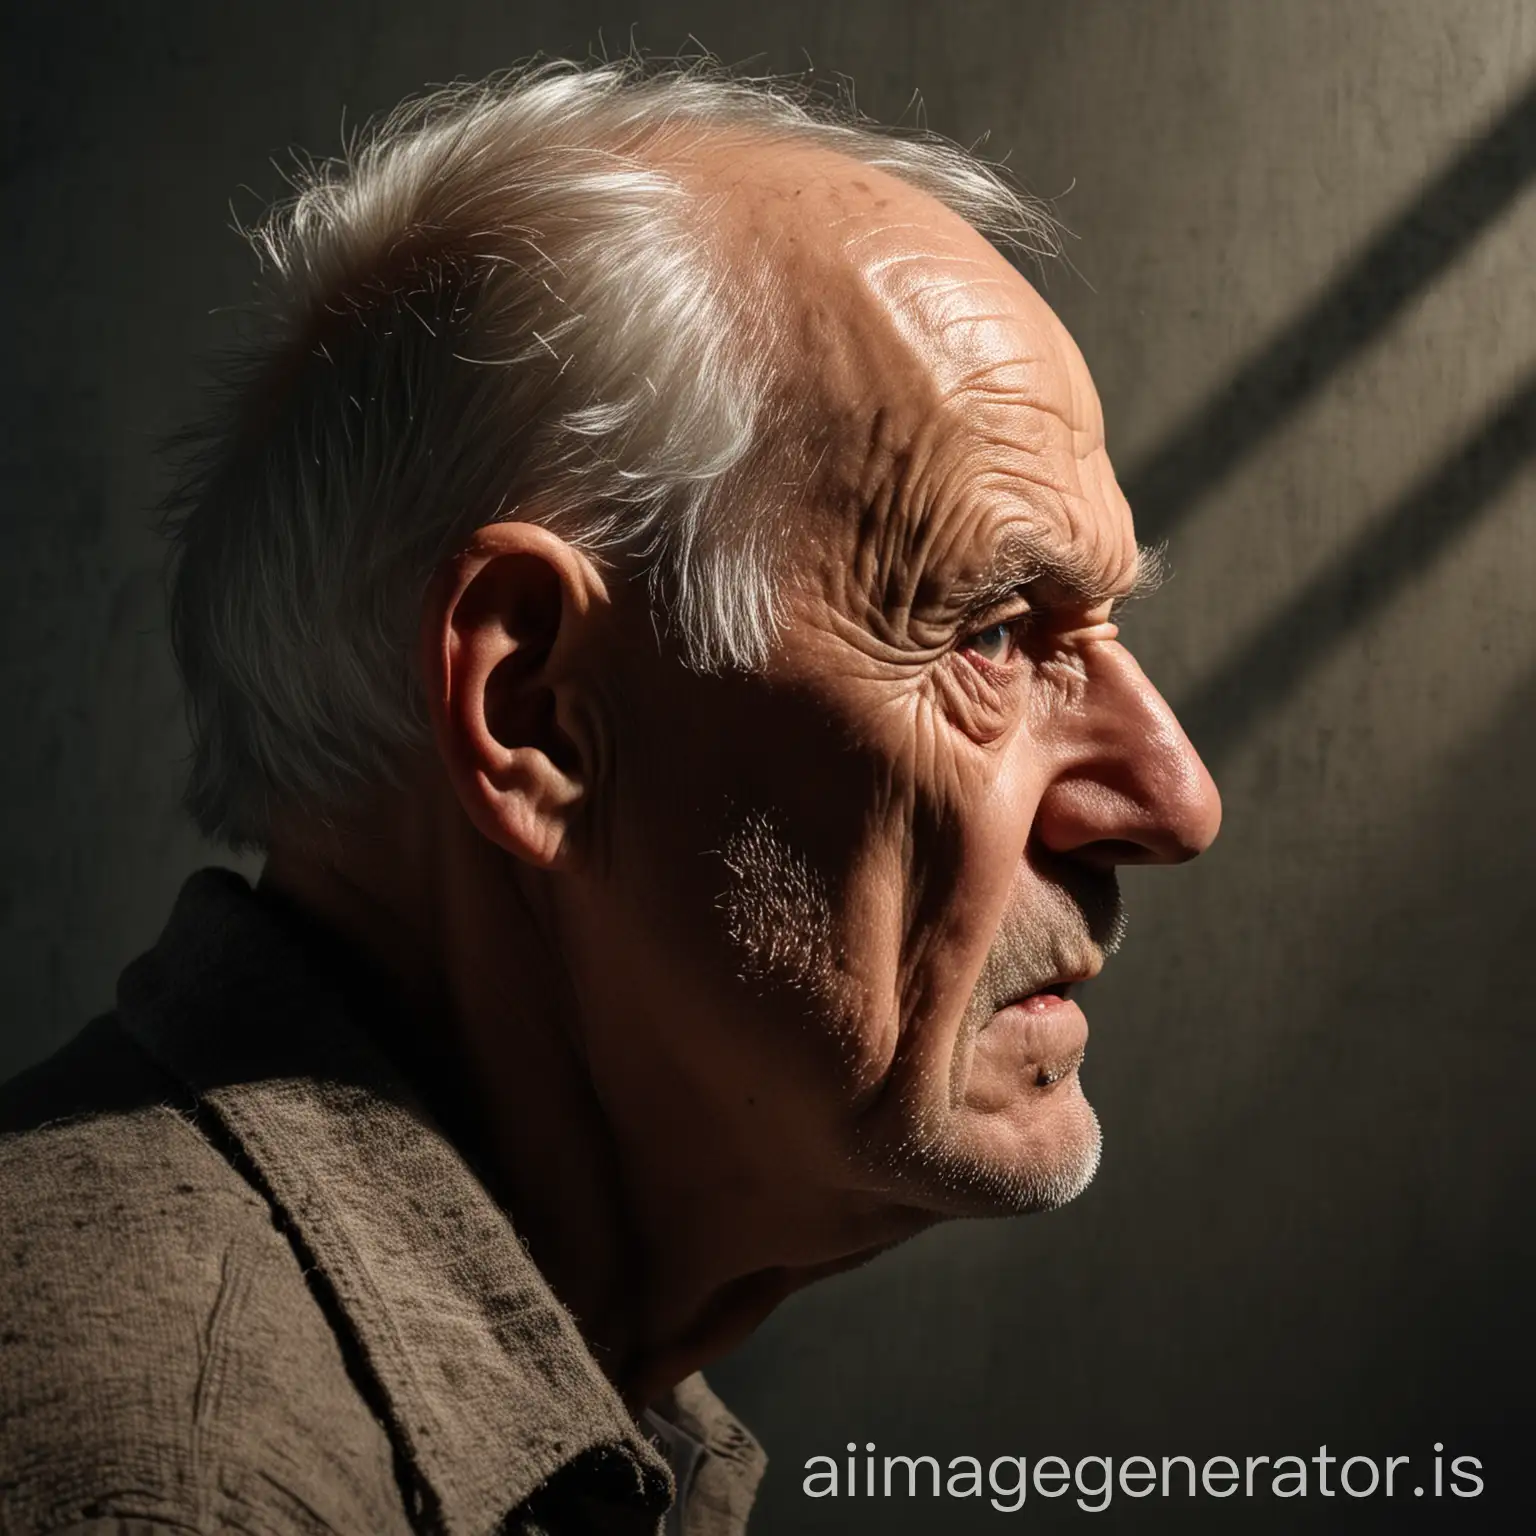 angry old man face in profile with heavy shadows